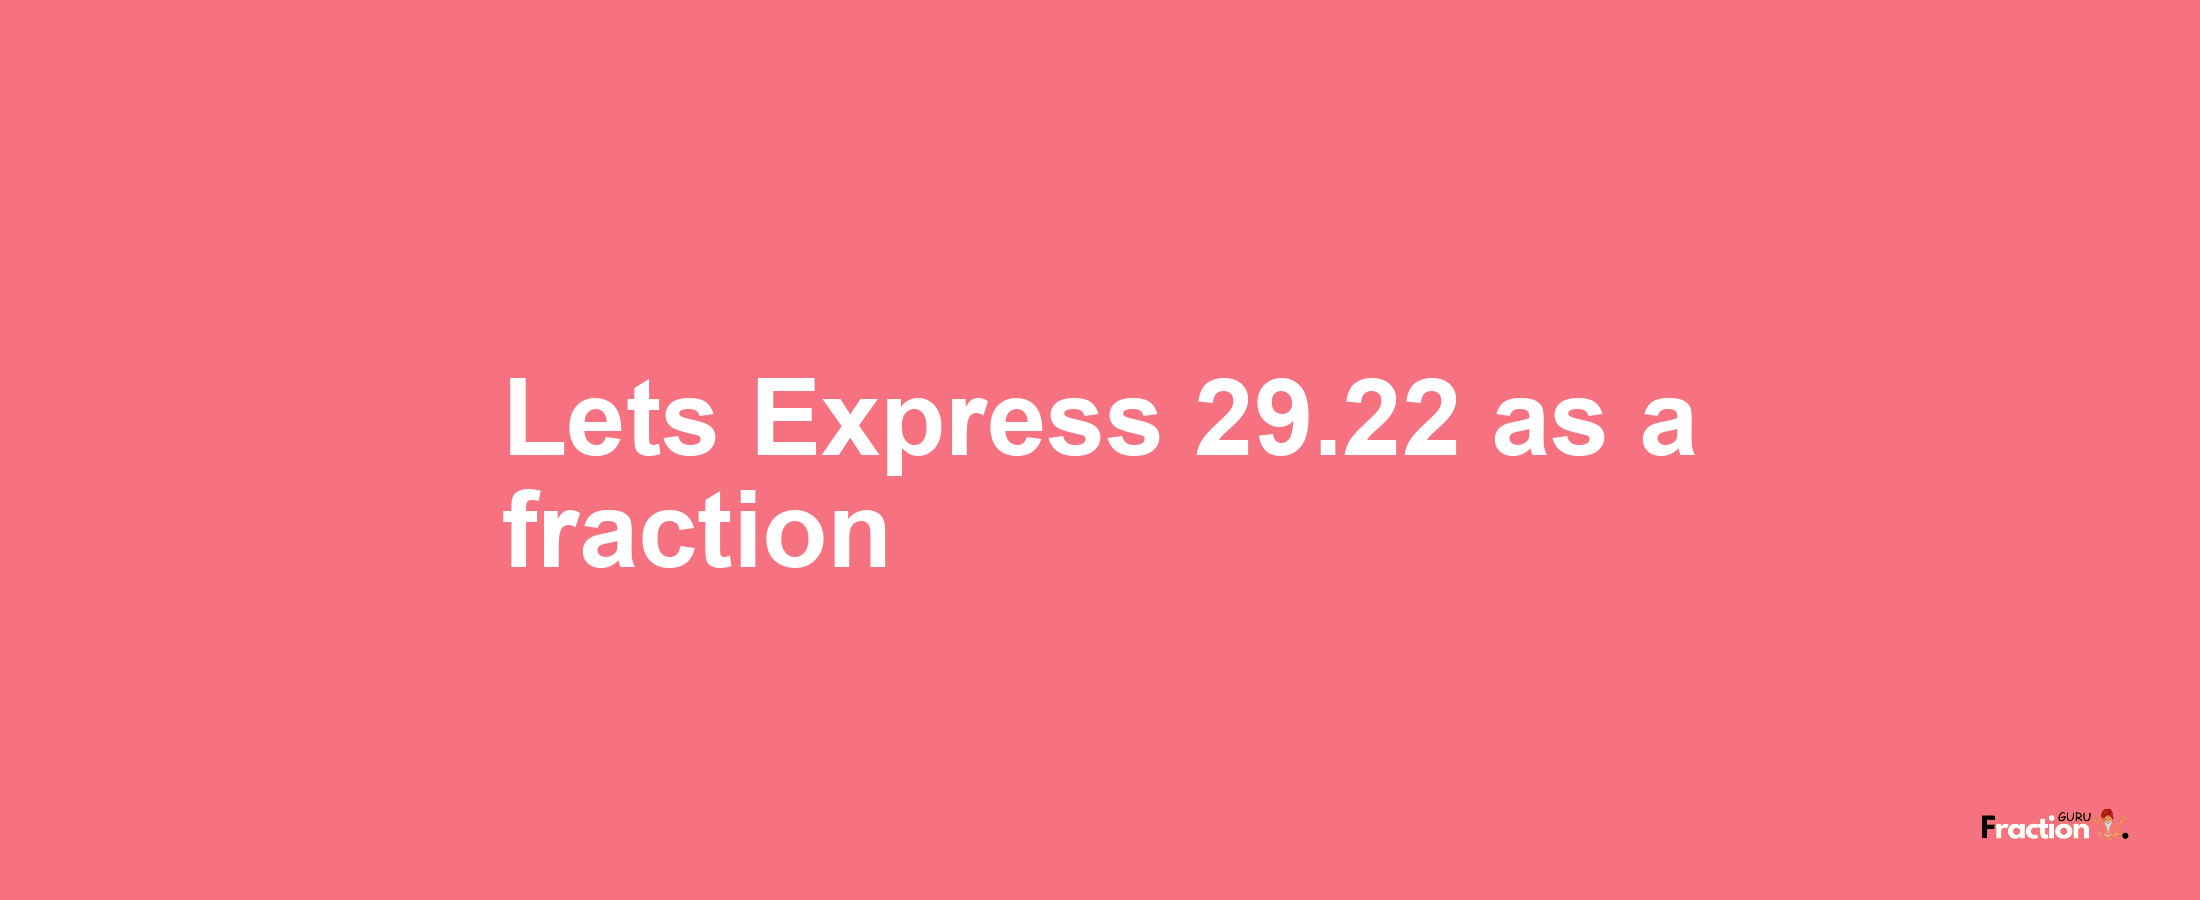 Lets Express 29.22 as afraction